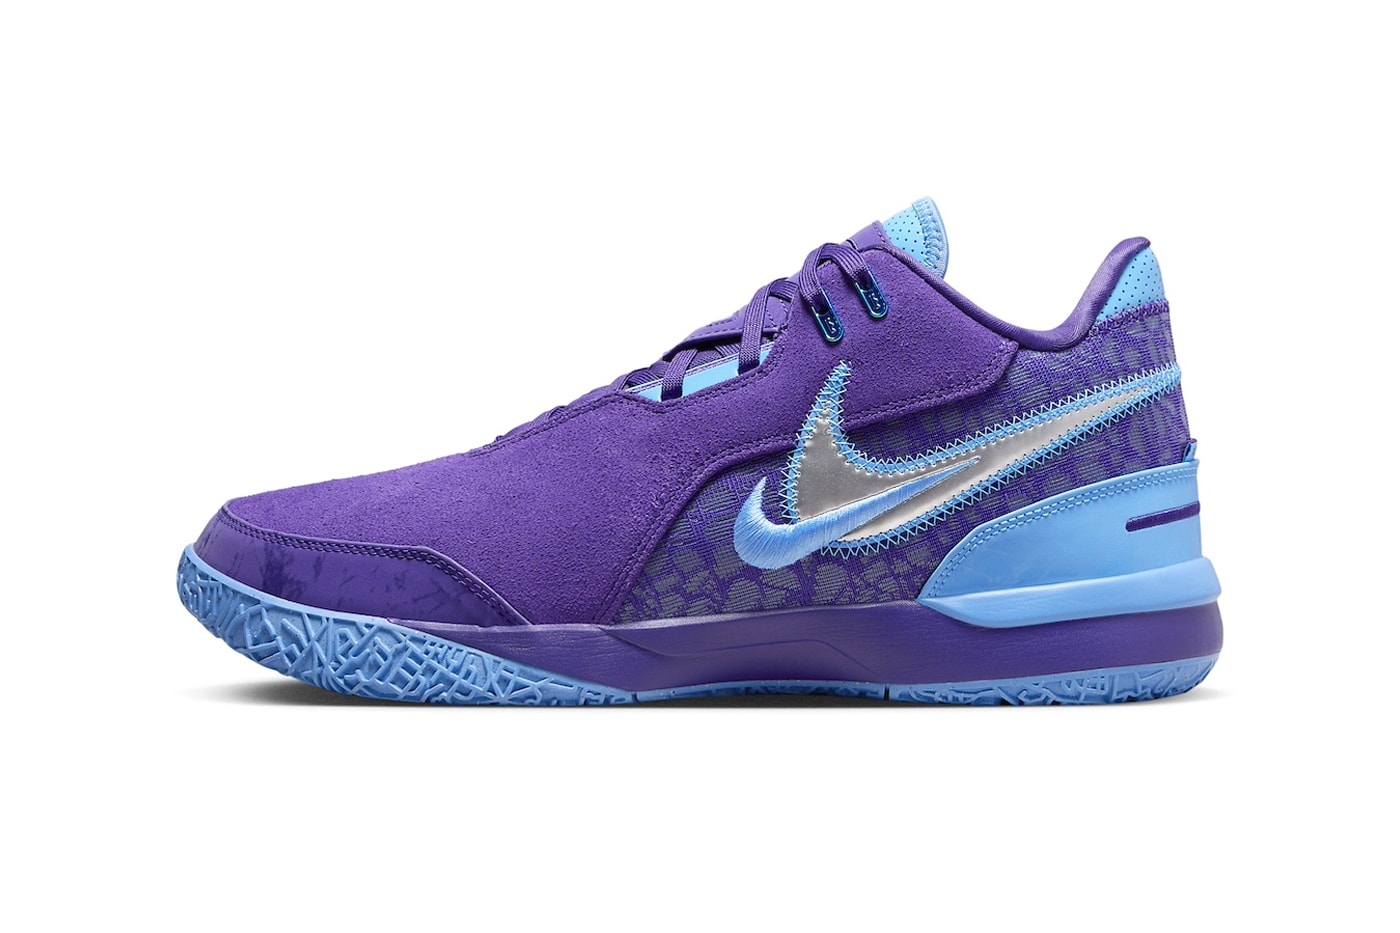 Official Look at the Nike Zoom LeBron NXXT Gen "Summit Lake Hornets" FJ1566-500 release info lebron james basketball nba charlotte hornets los angeles lakers colorway